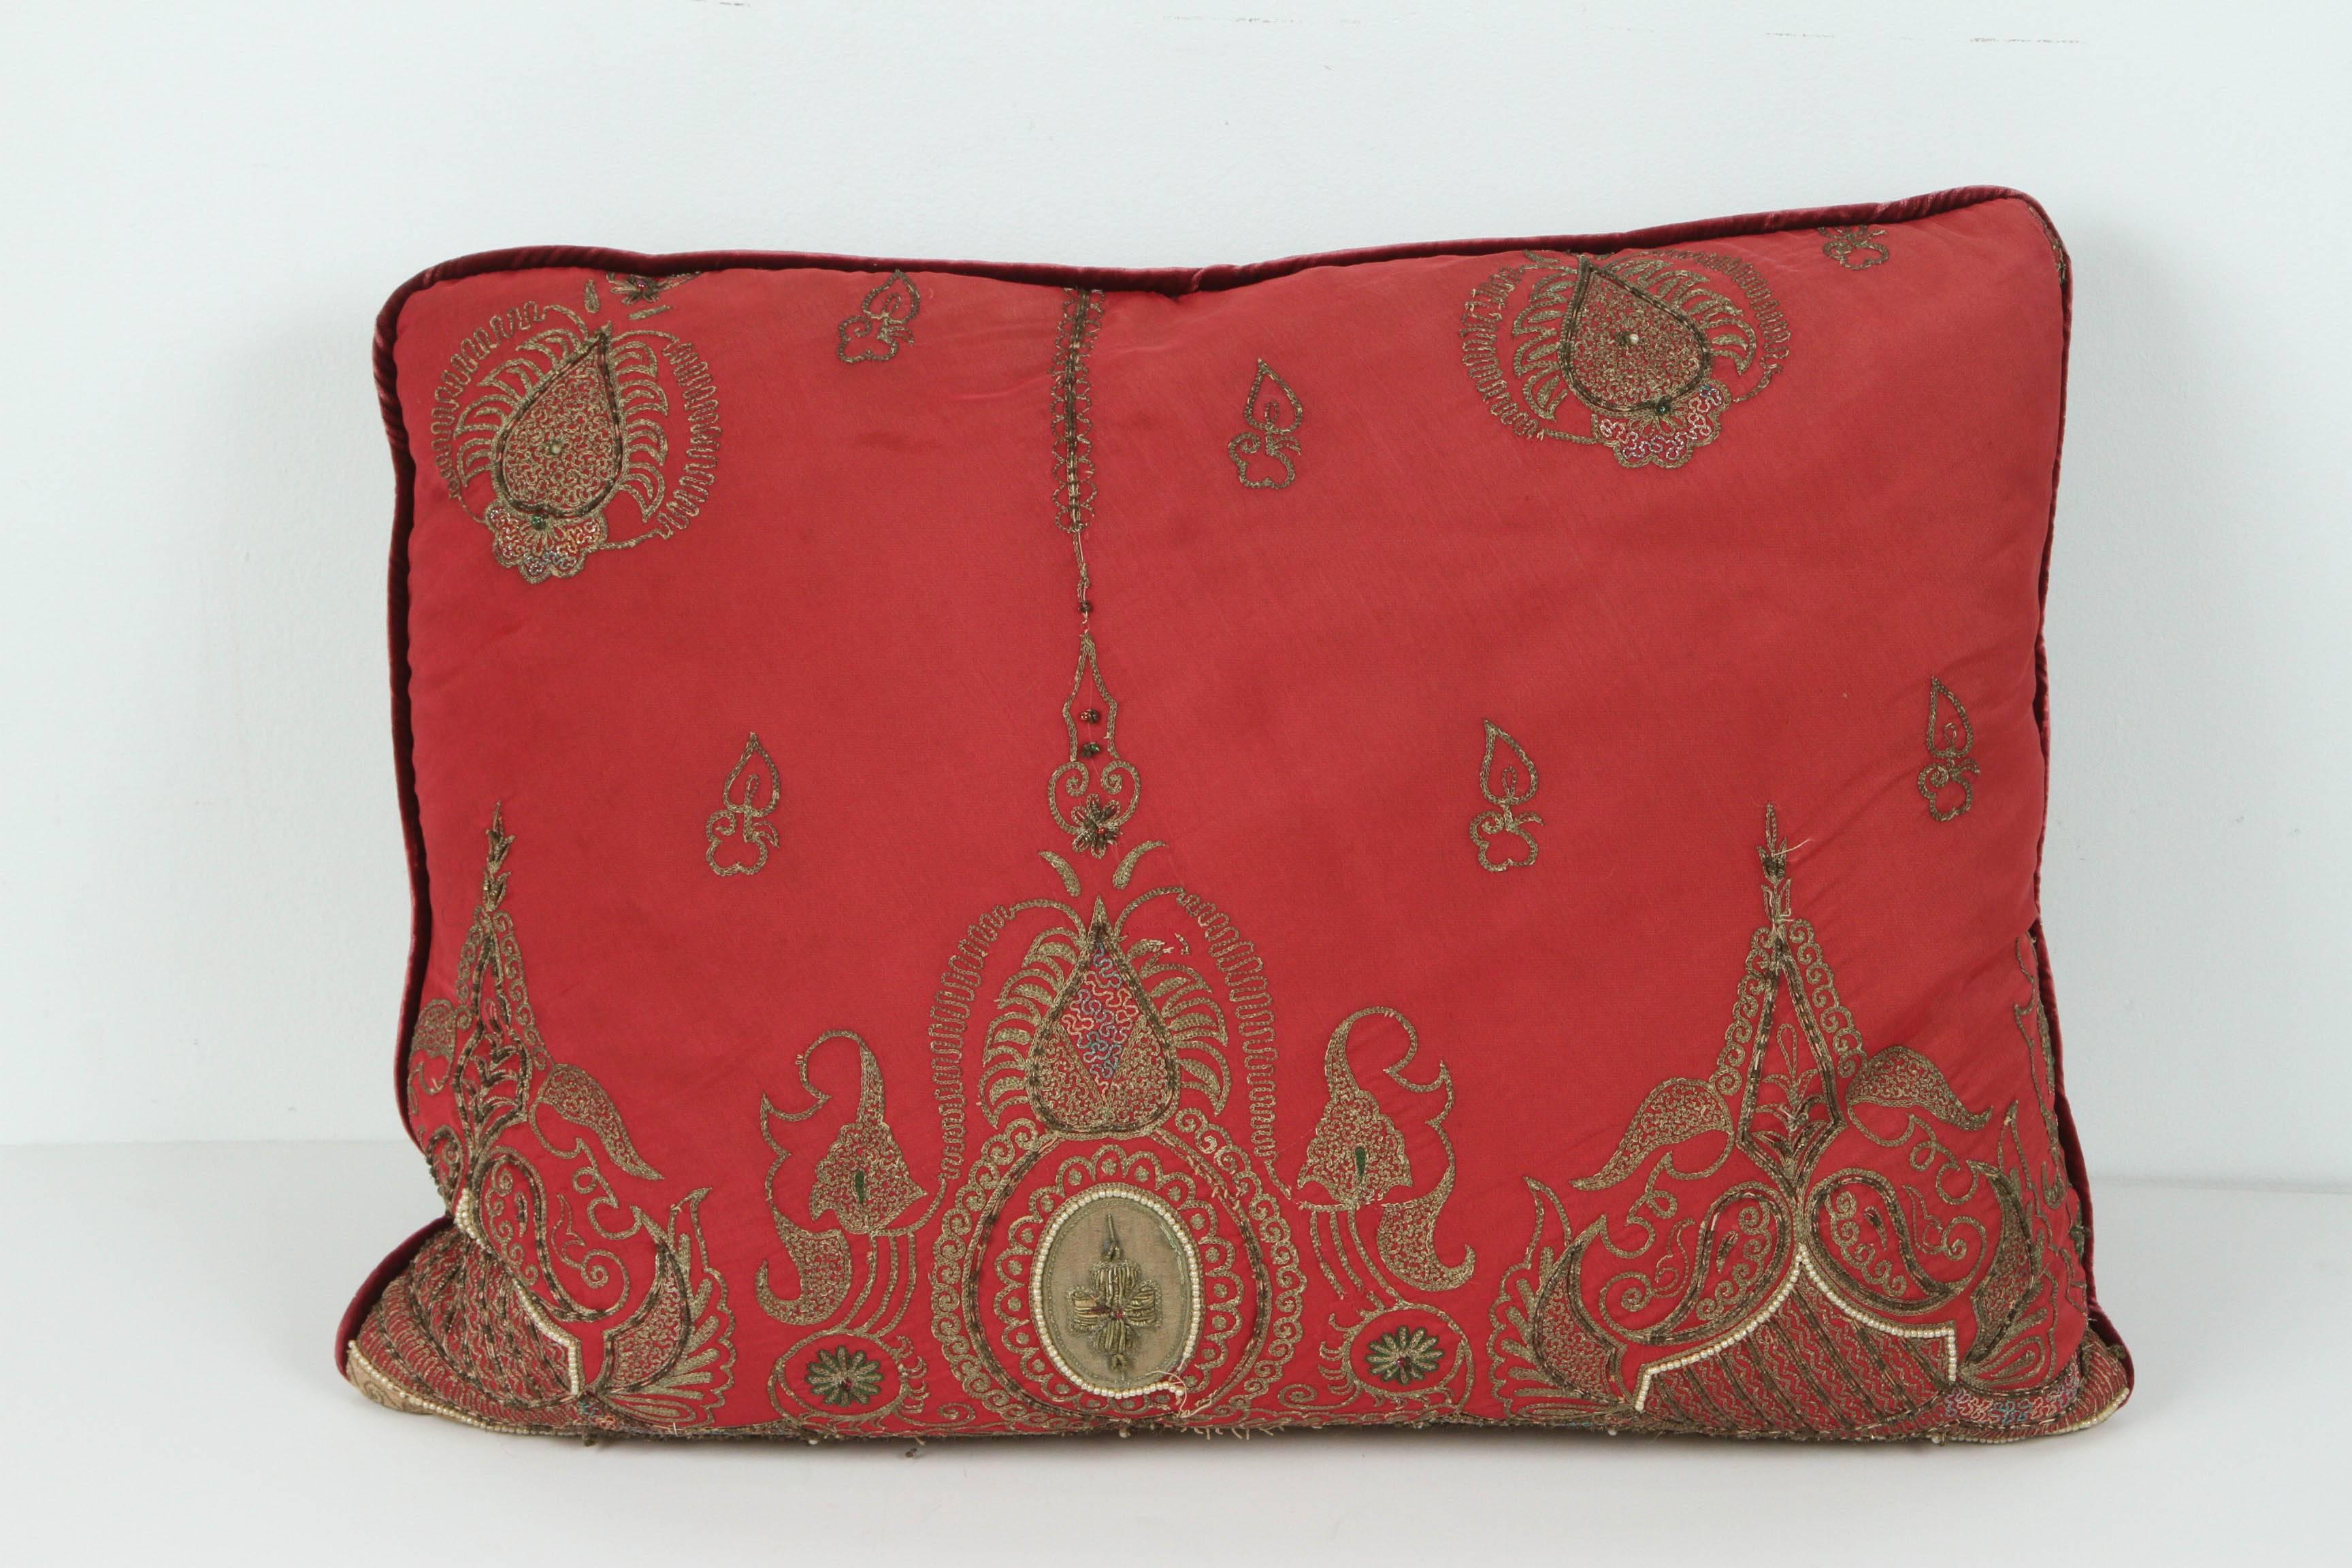 Pair of antique silk pillows with metallic threads and dark burgundy velvet backing.
Pair of handmade silk pillows made from an antique 19th century Turkish silk embroidered panels with gold metallic thread and pearls.
Down filled and only a pair